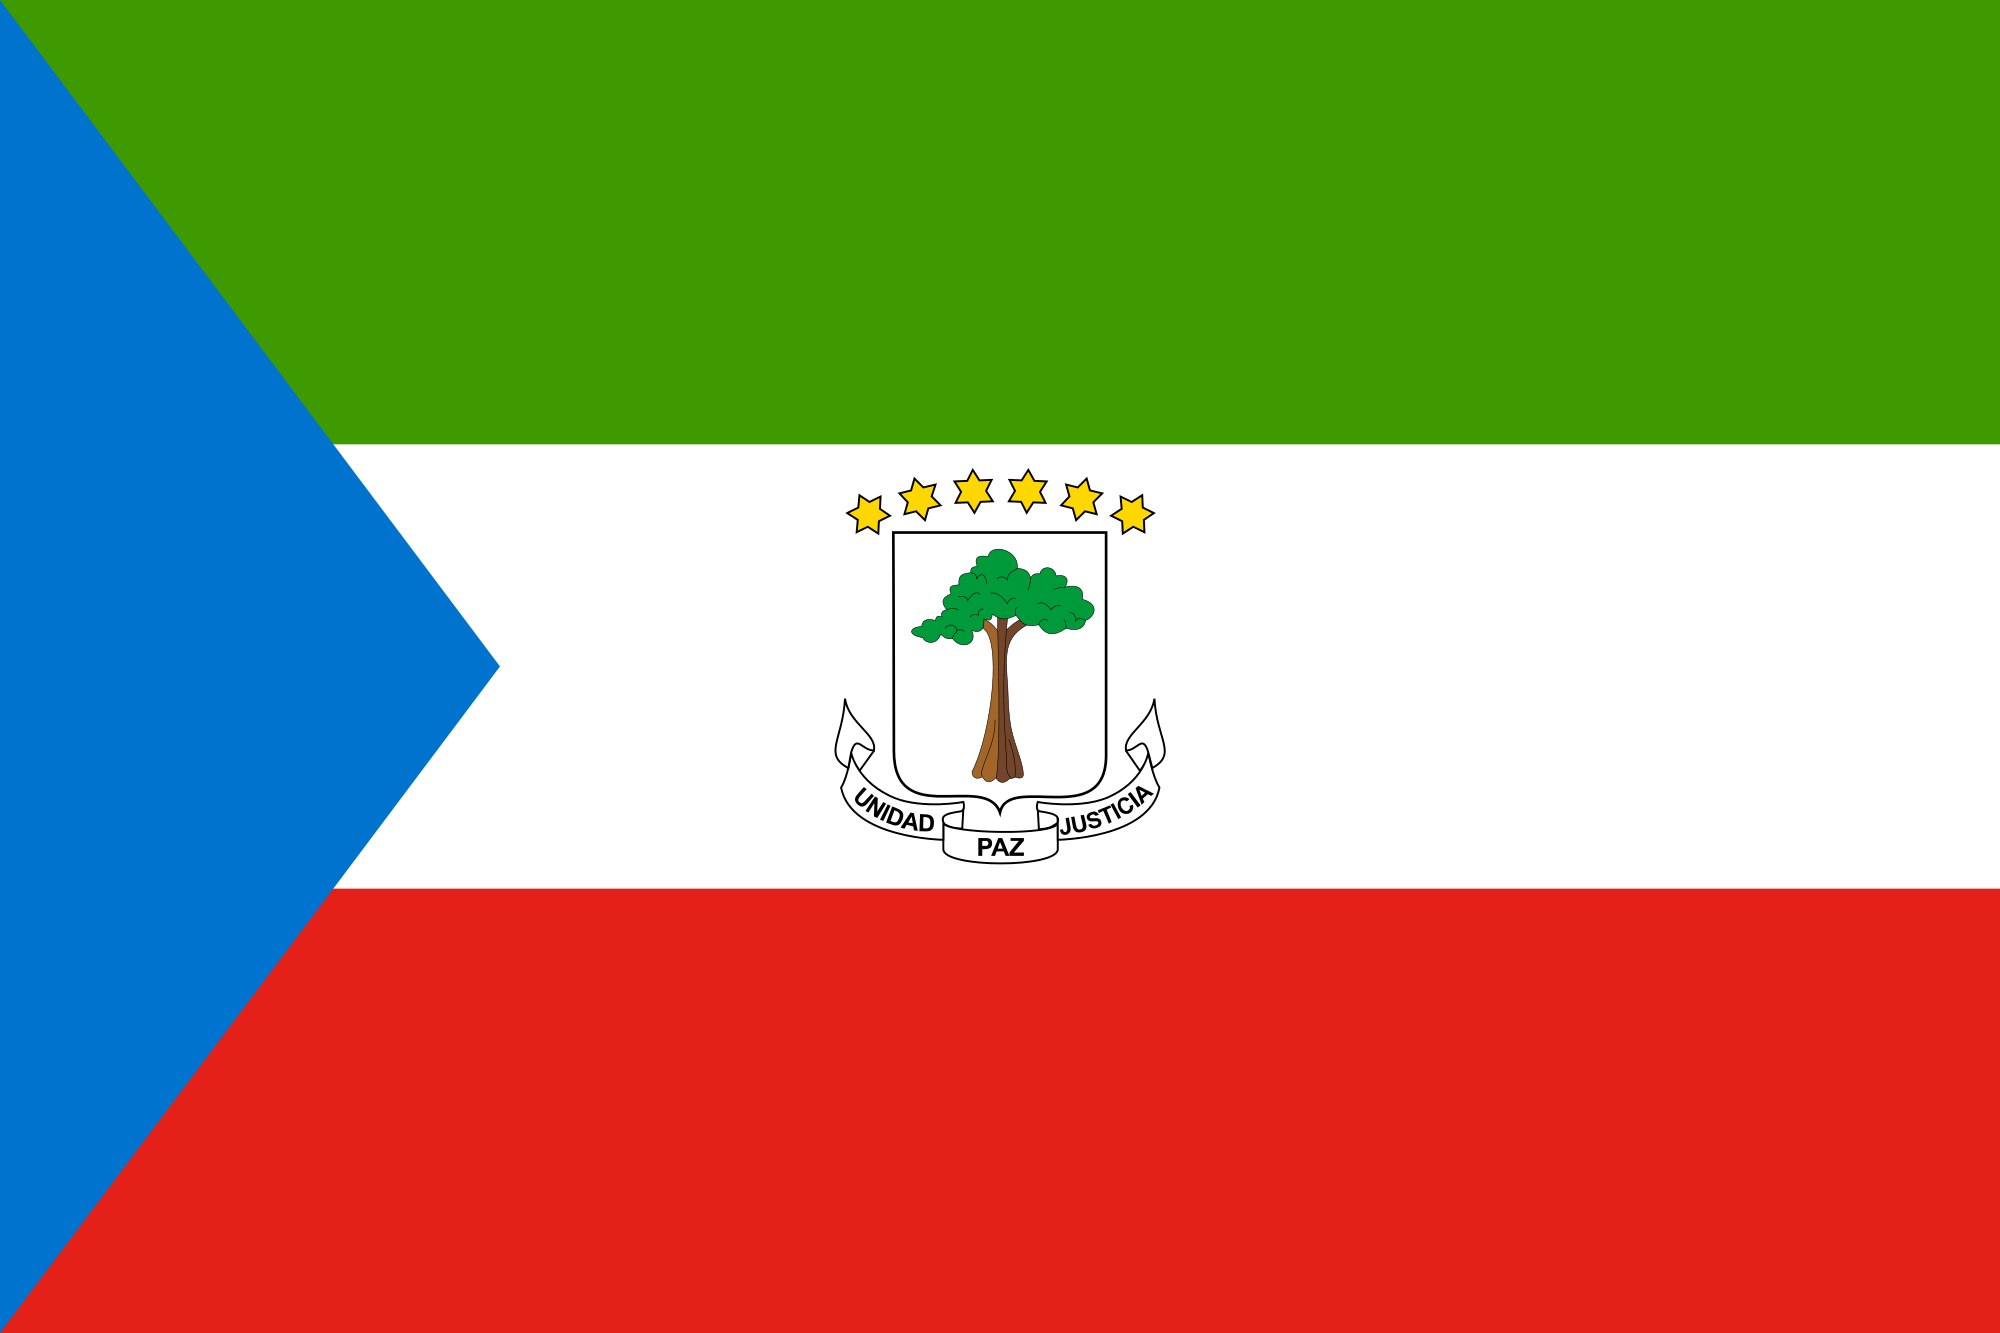 Equatorial Guinea set for increase in offshore drilling by 2019